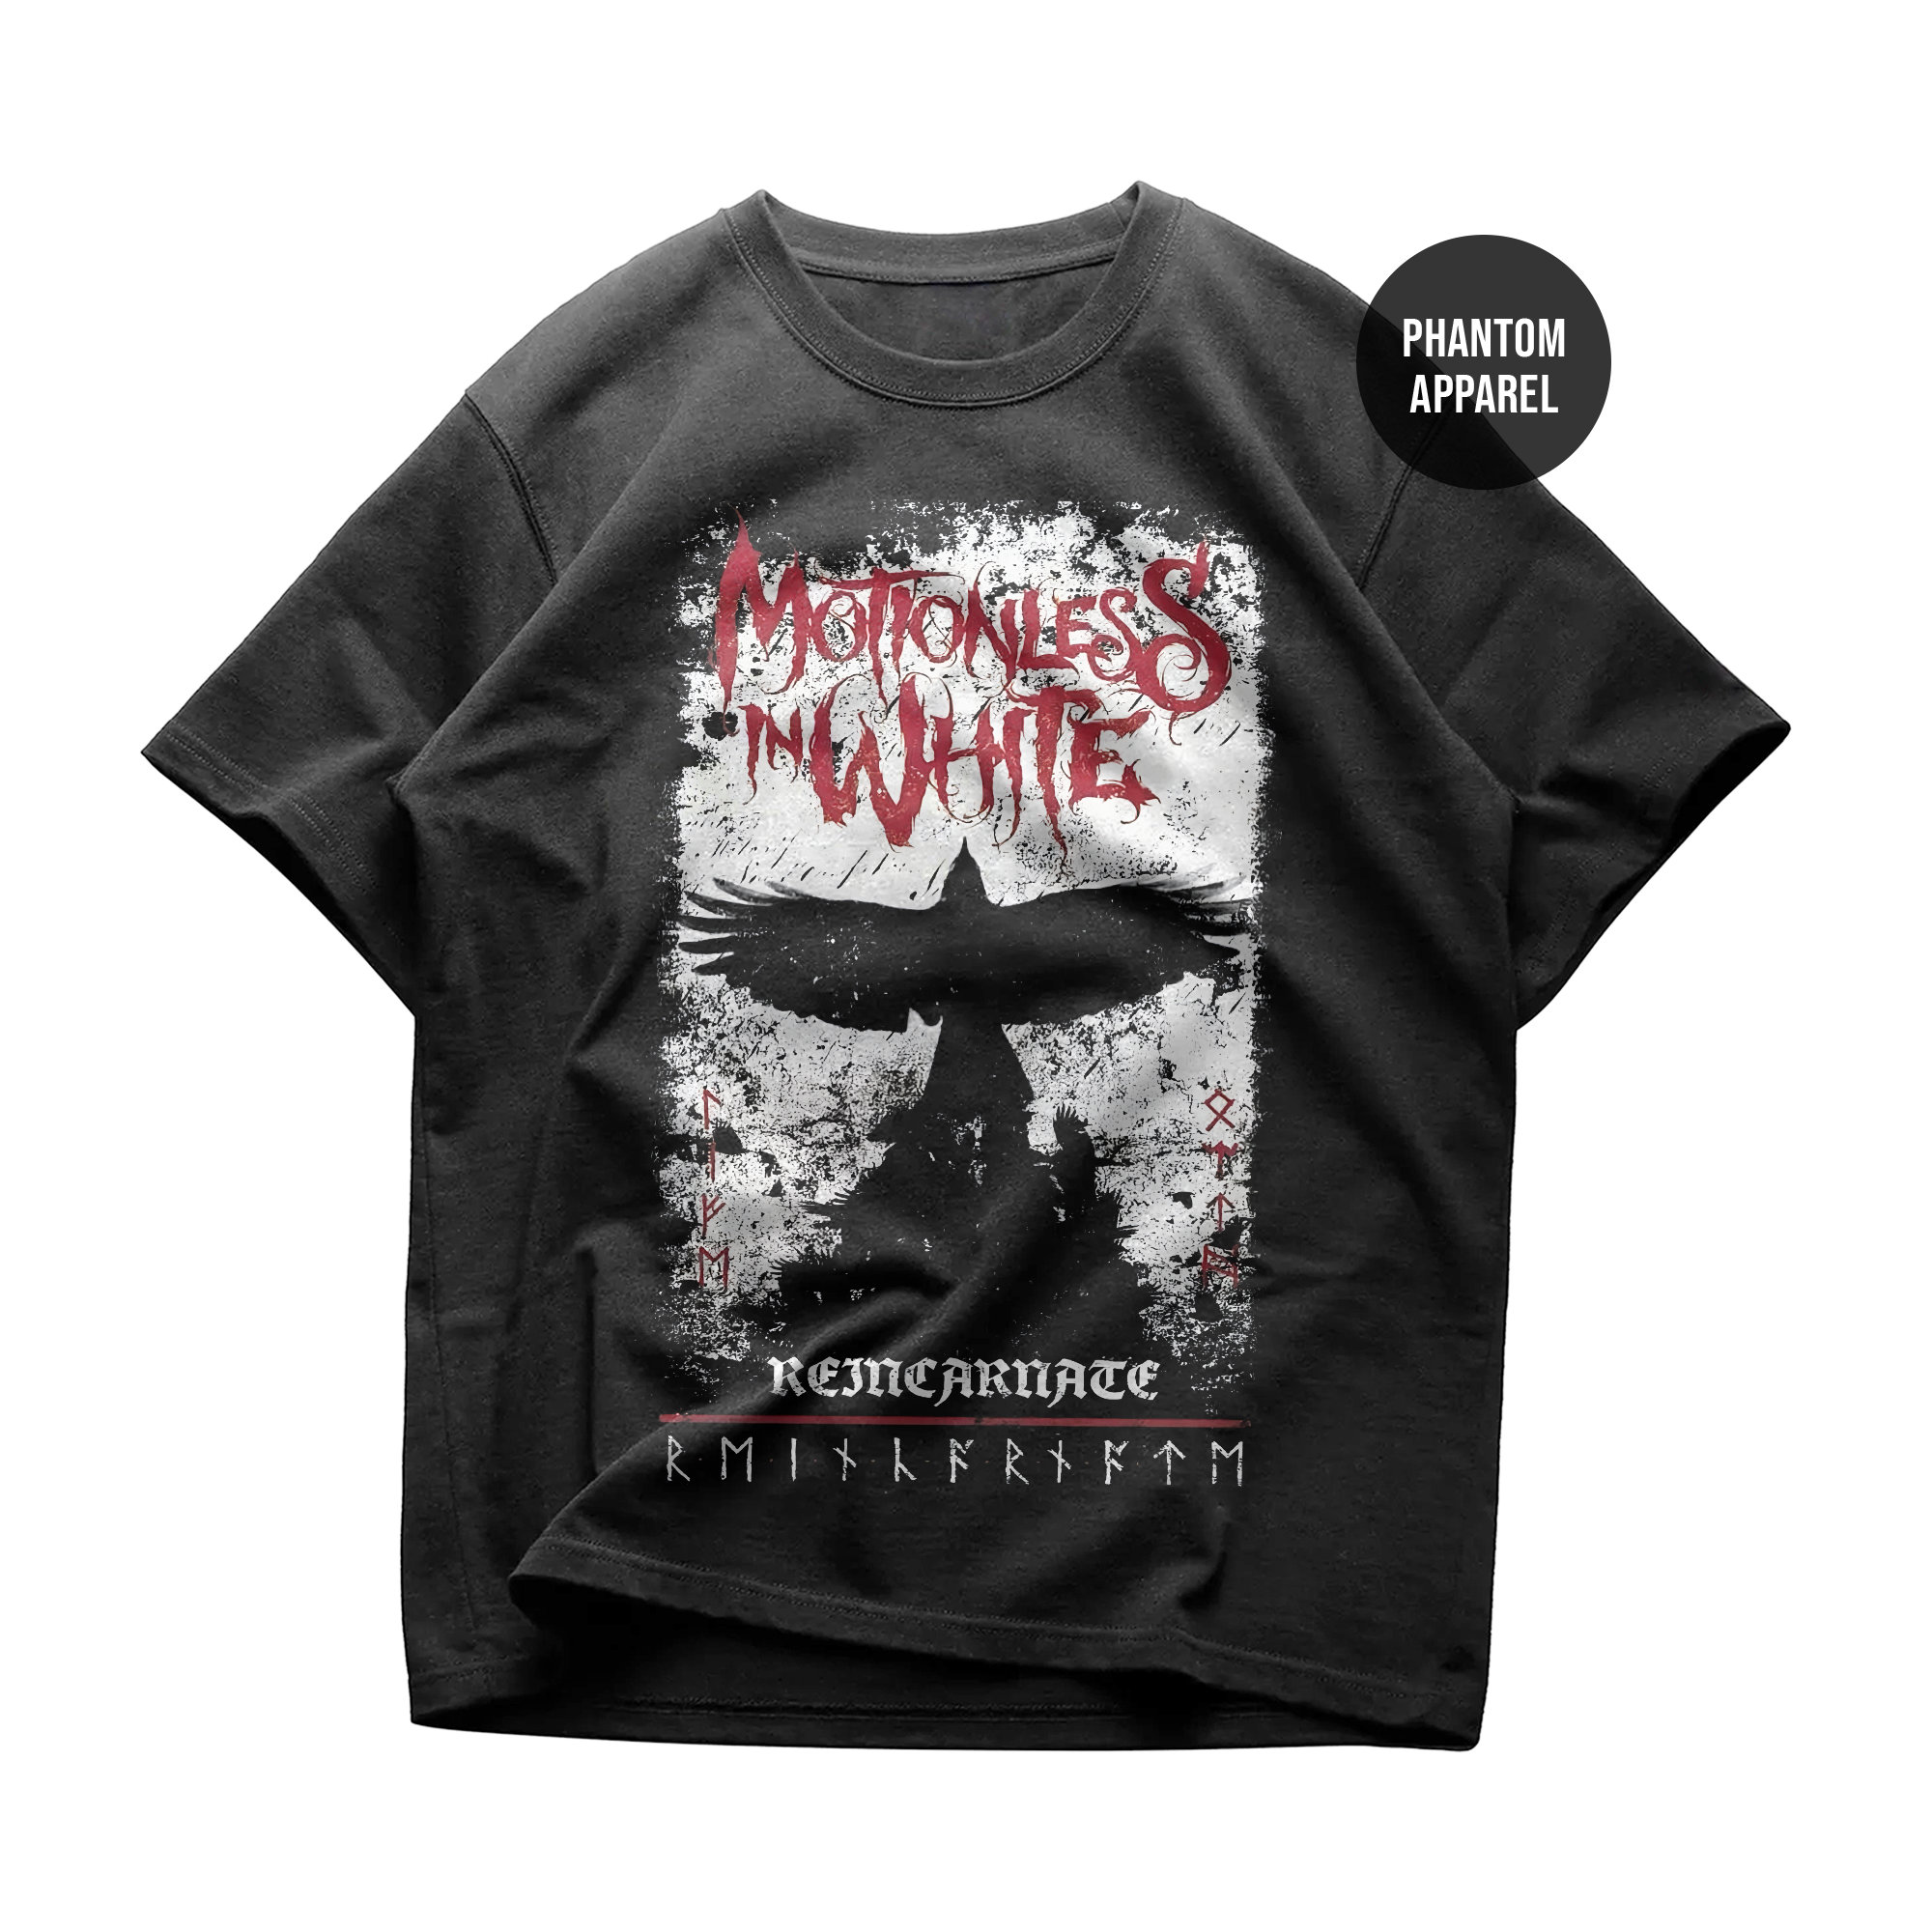 Motionless In White T-shirt - Metal Band Tee